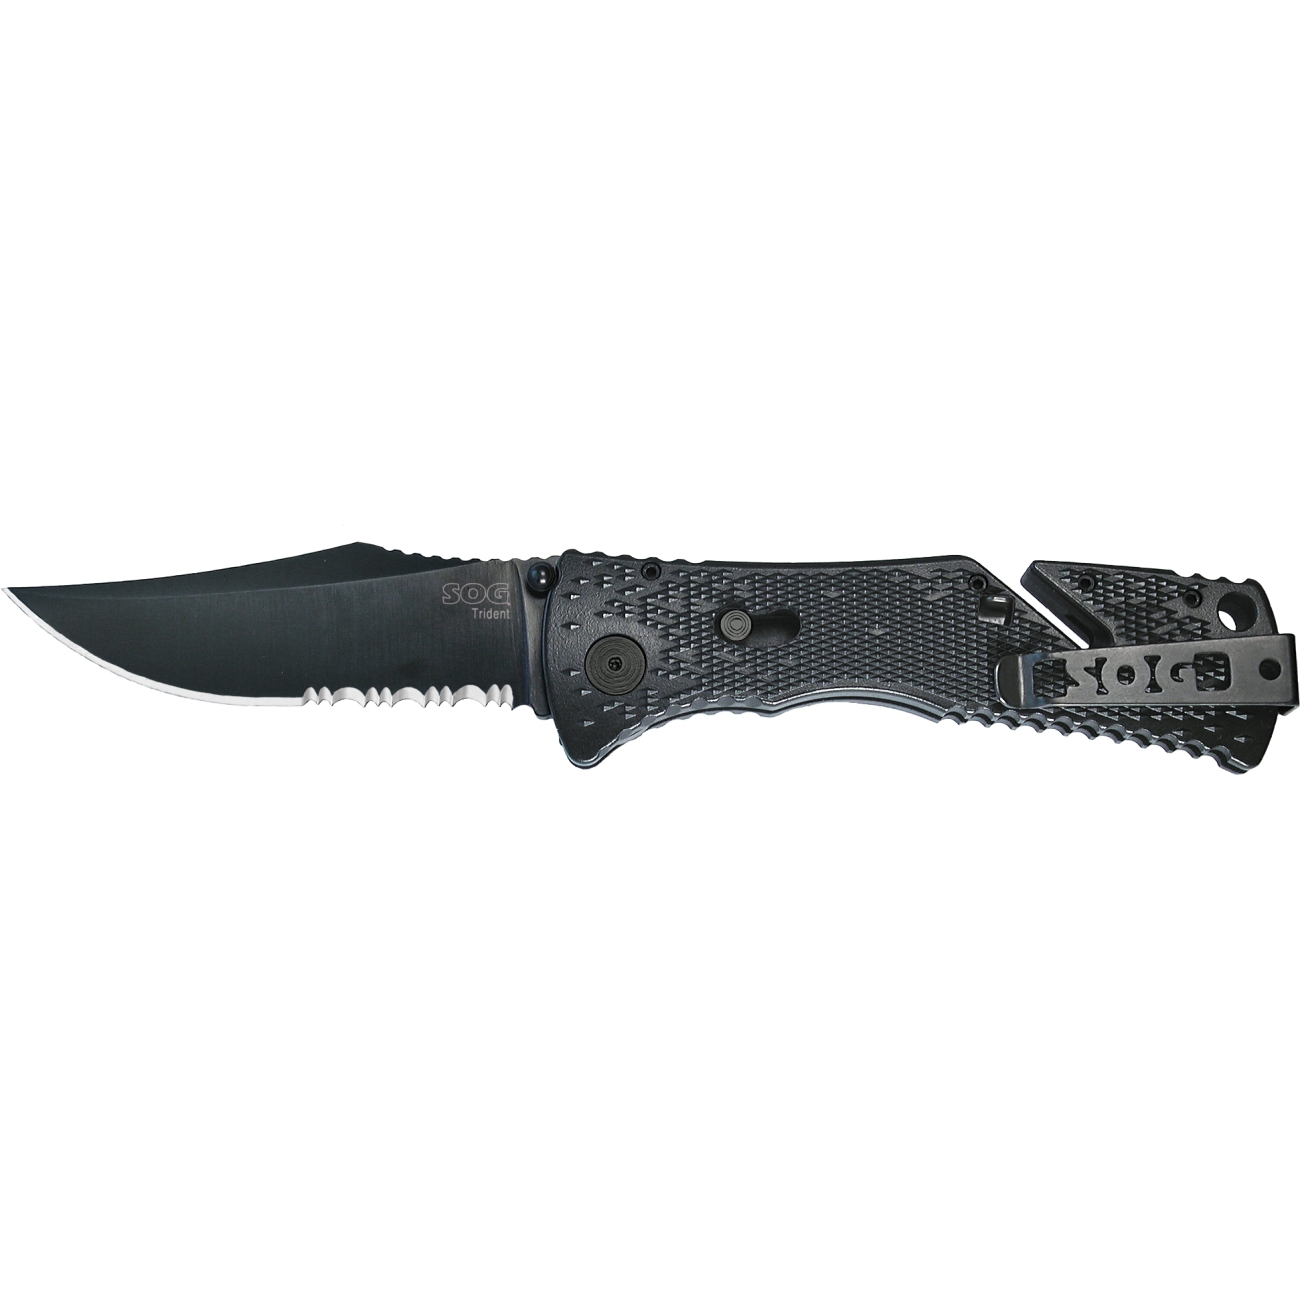 Knife, Trident - 3.75 Blade Clam Pk